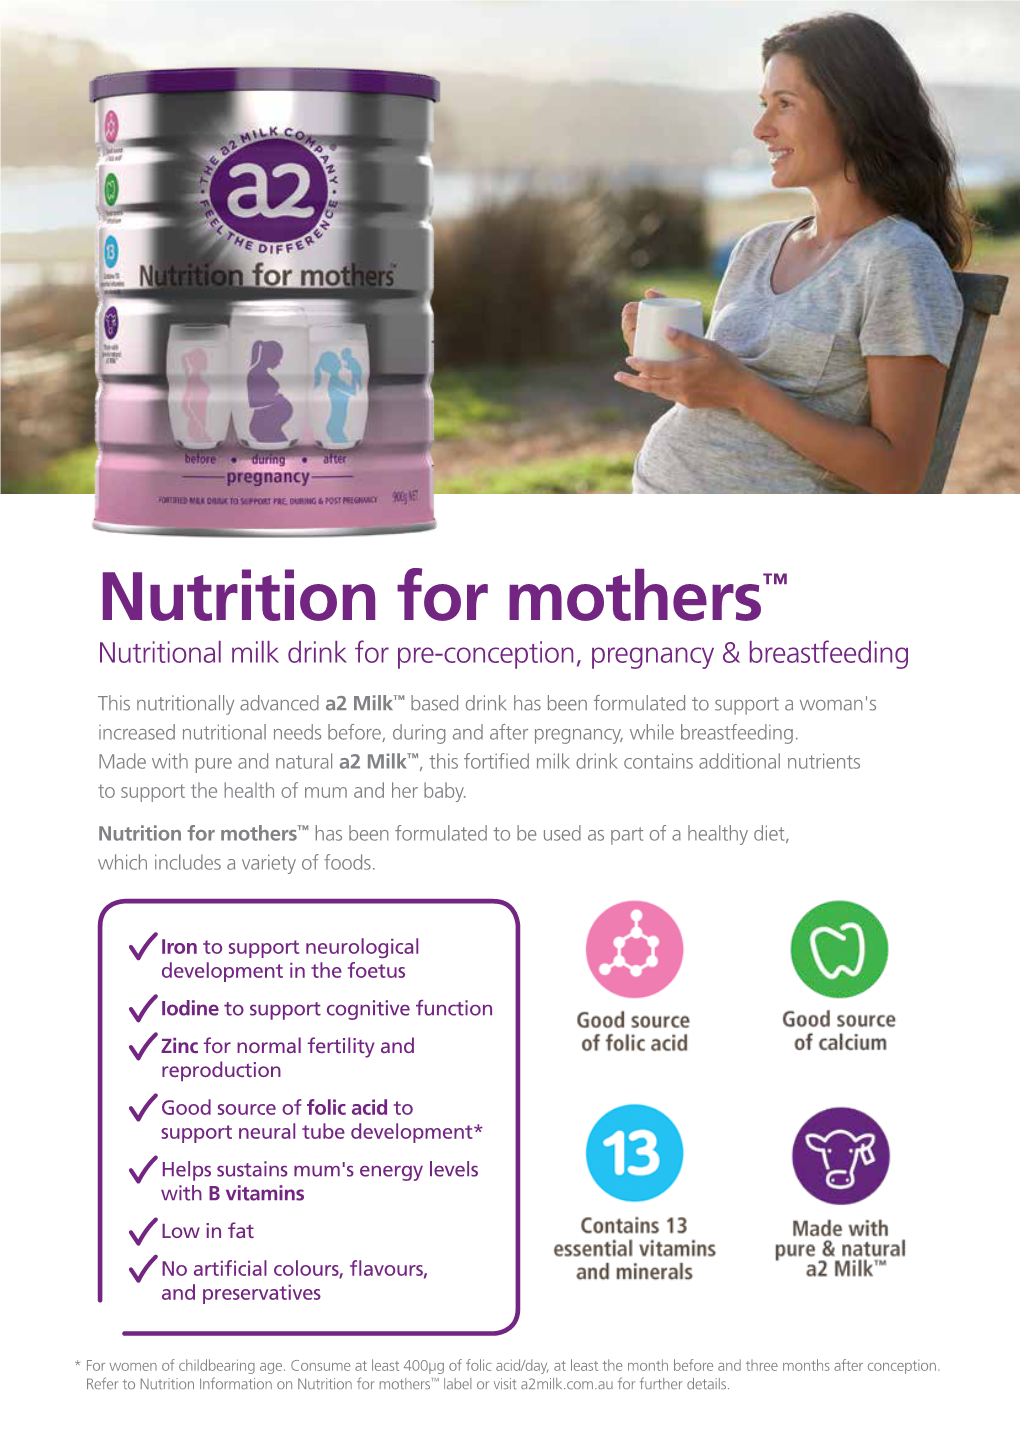 Nutrition for Mothers™ Has Been Formulated to Be Used As Part of a Healthy Diet, Which Includes a Variety of Foods